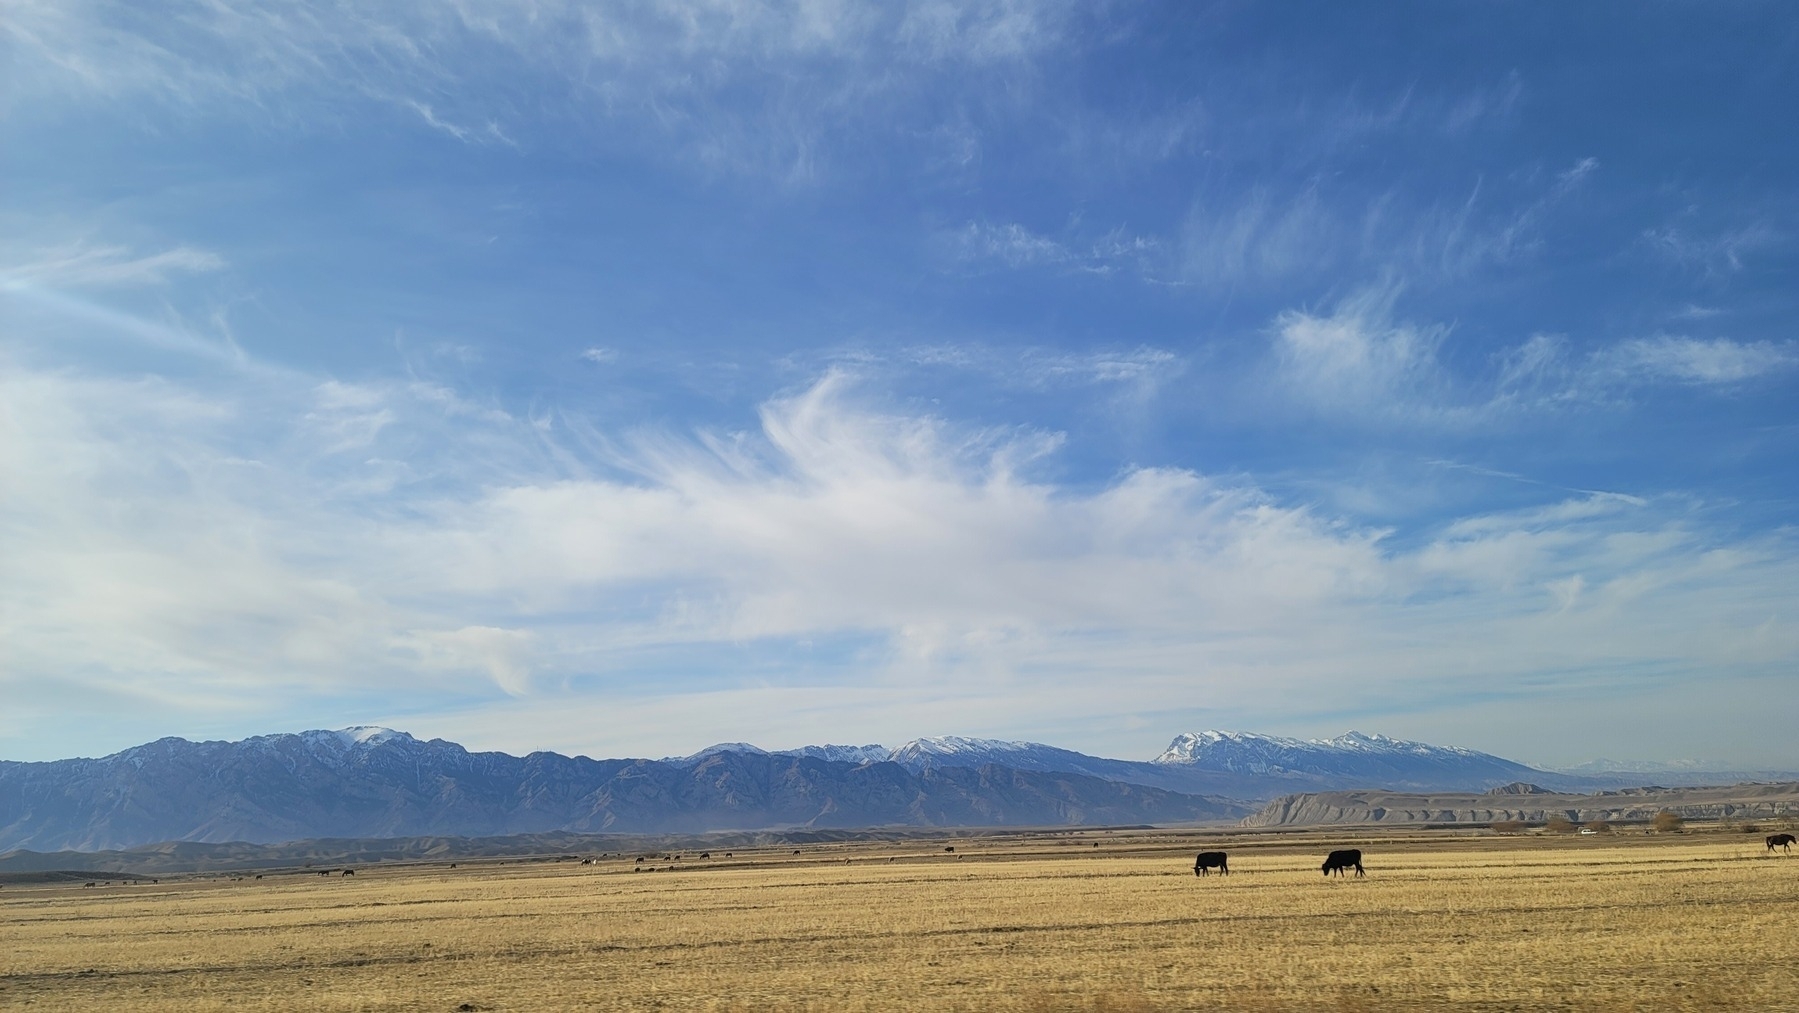 field with two black cows grazing, mountains in the distance, blue sky